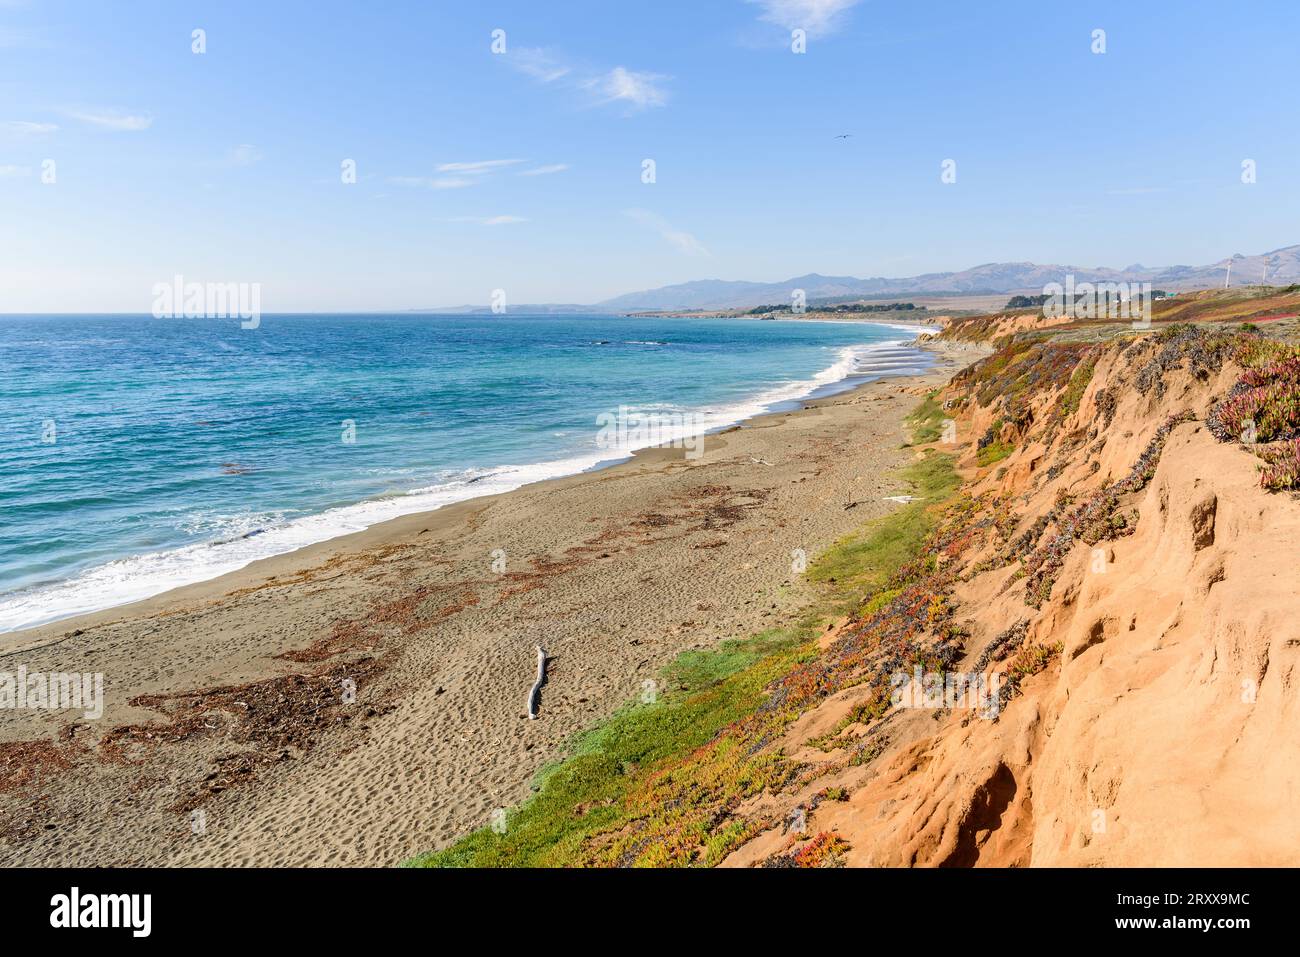 Deserted sandy beach at the foot of a steep cliff along the coast of California on a sunny autumn day Stock Photo